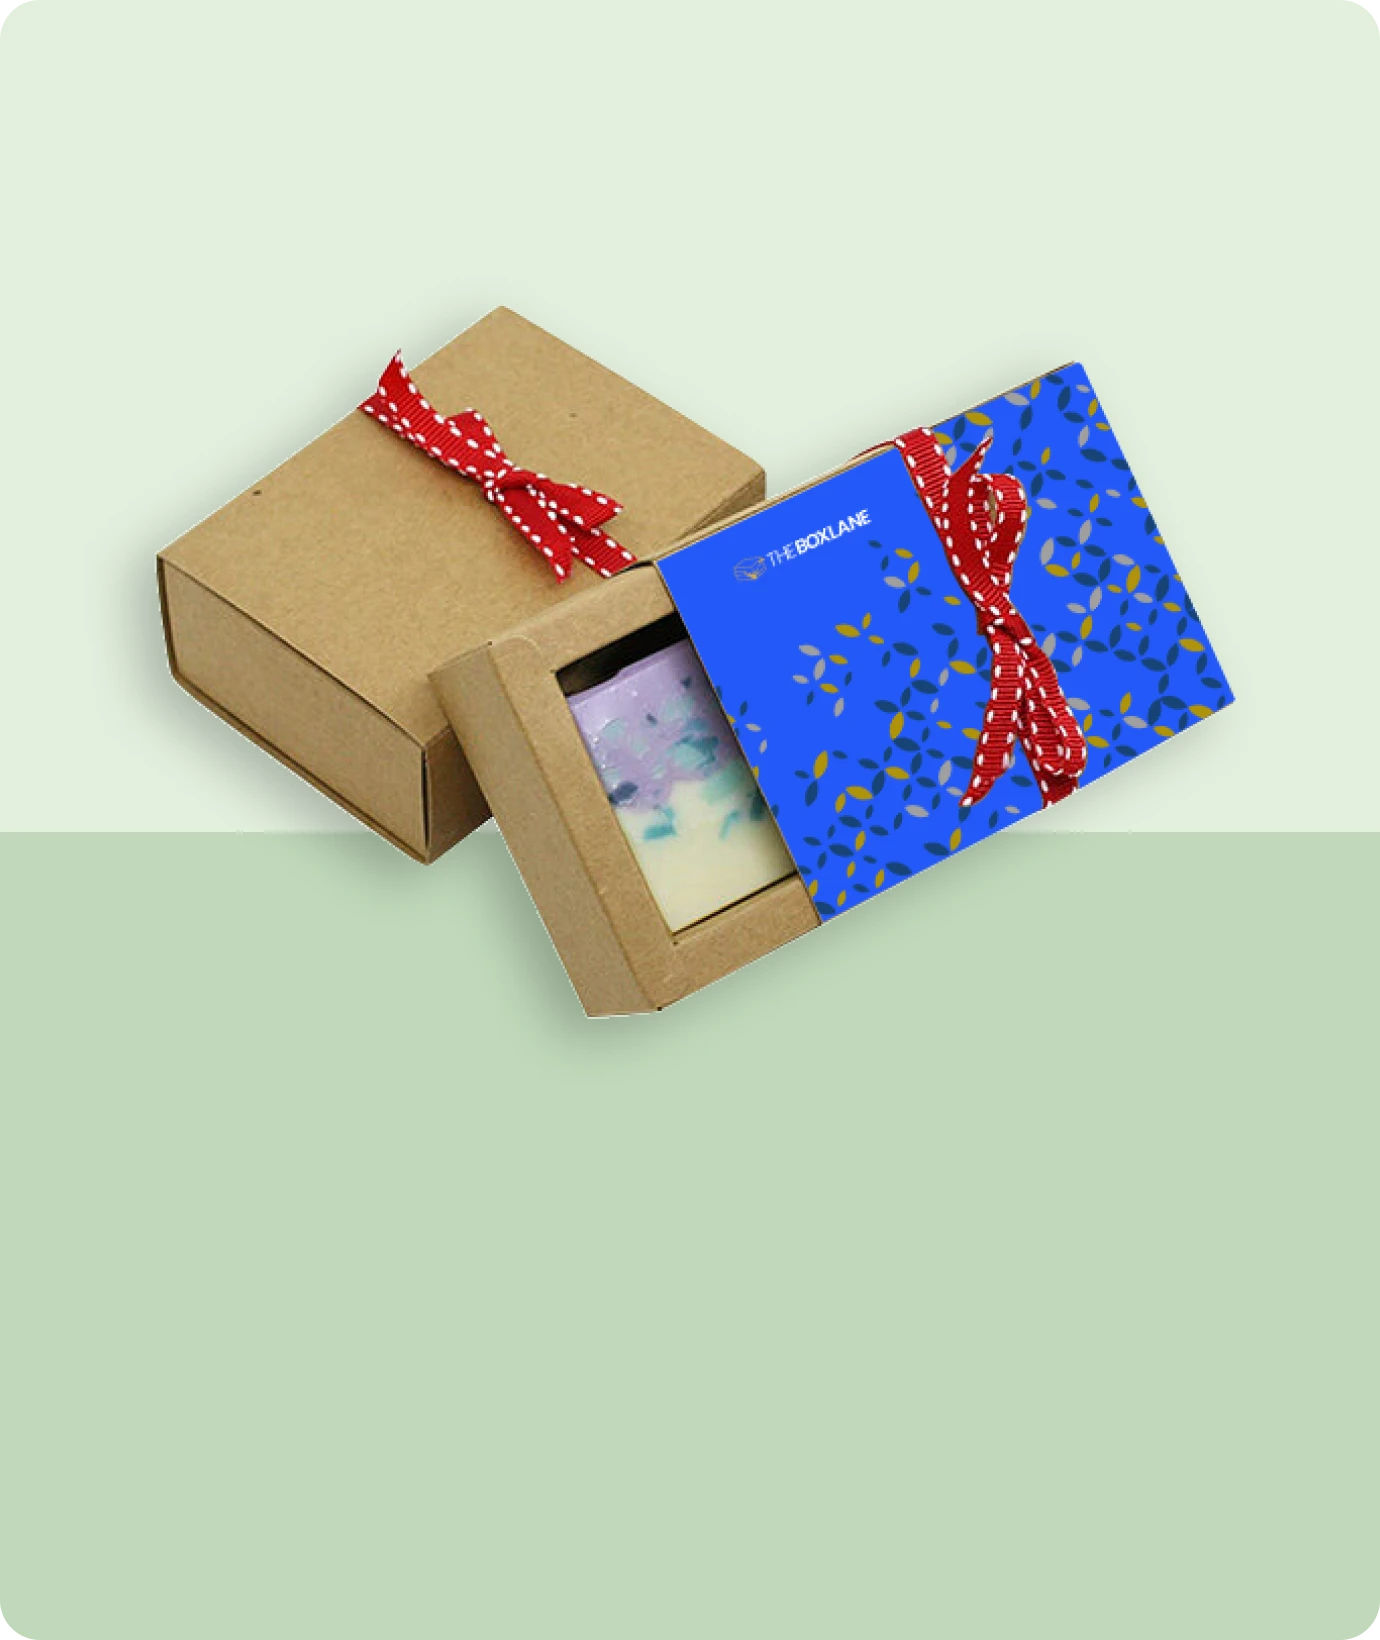 Handmade Soap Boxes related product image | The Box Lane